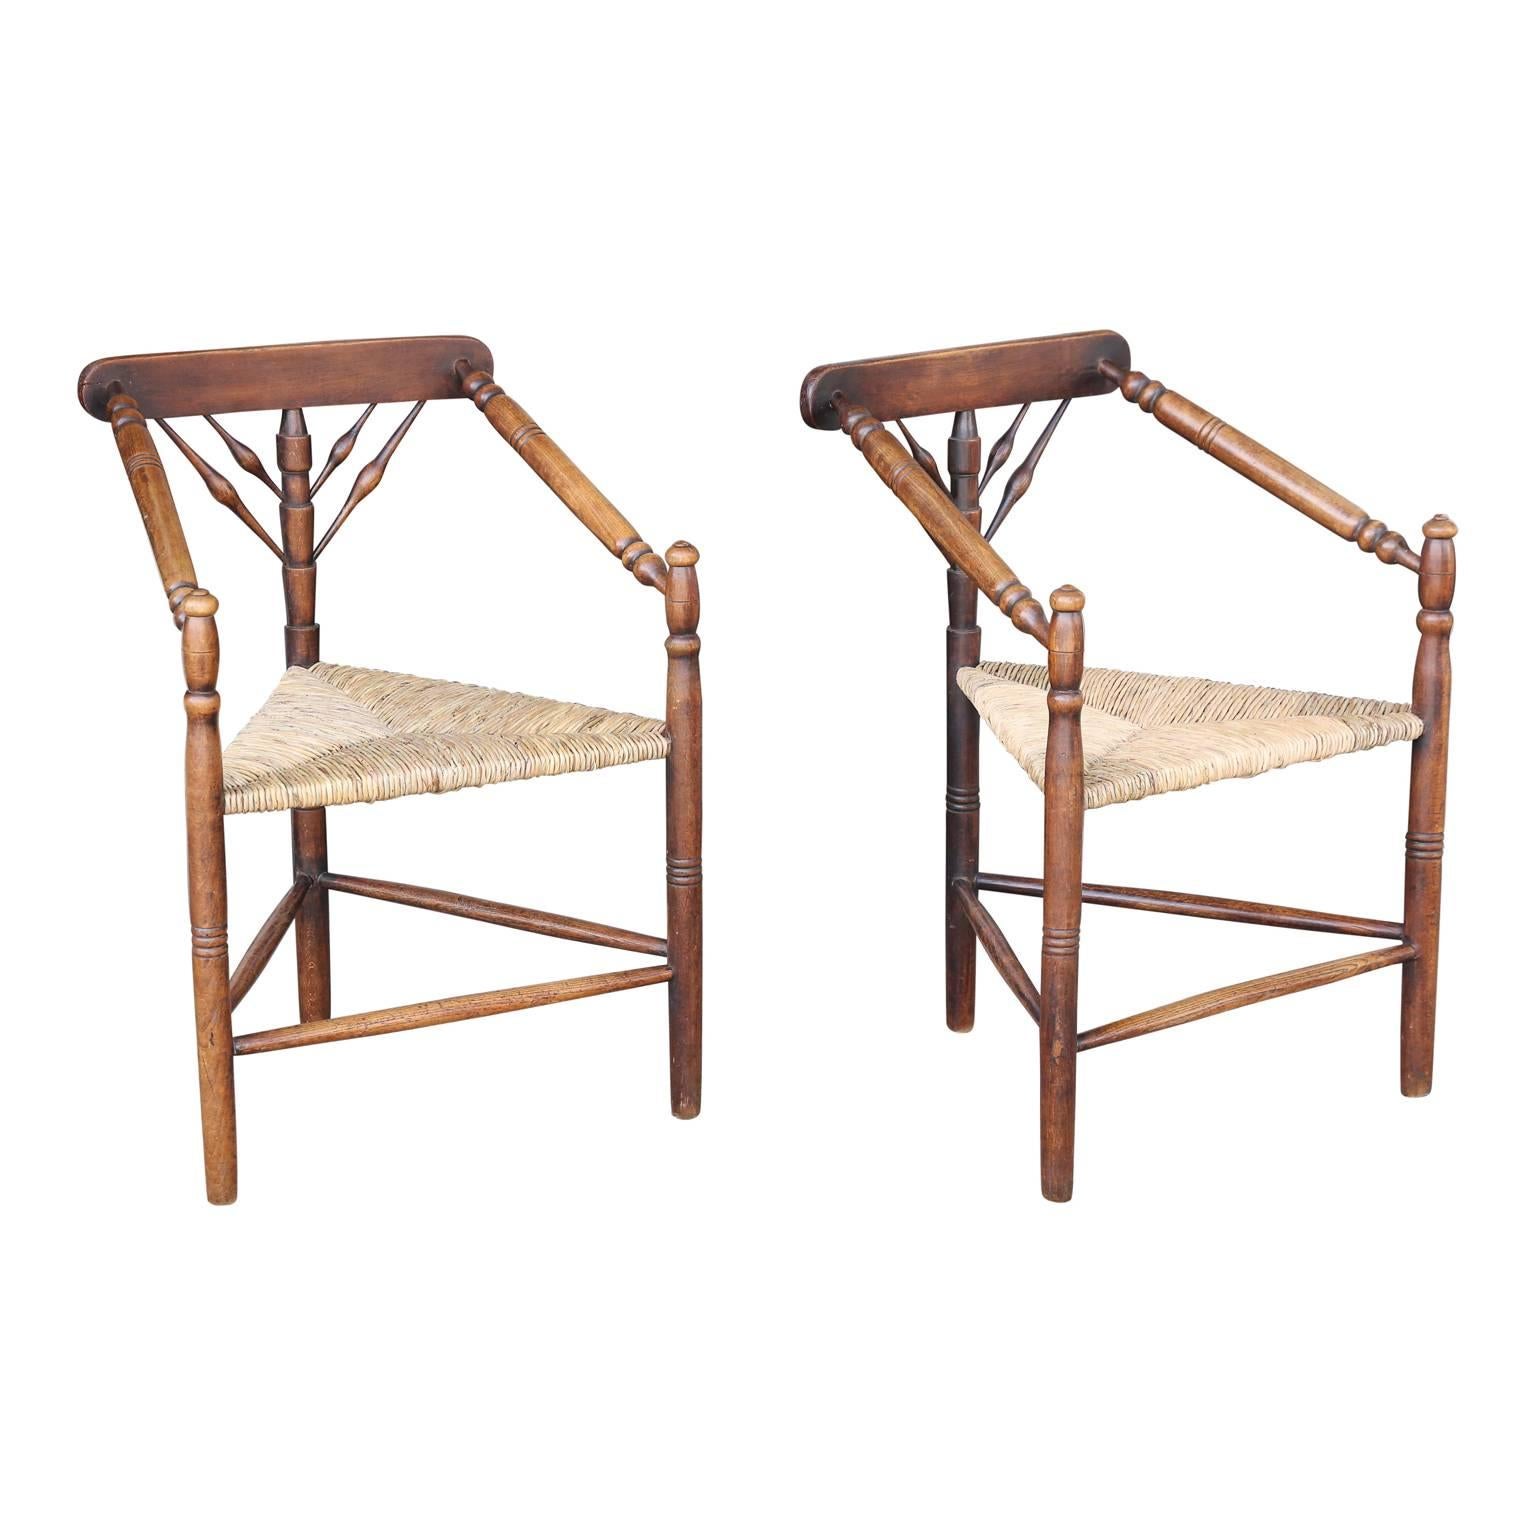 English Set of Four Early 20th Century Turner Chairs by William Birch